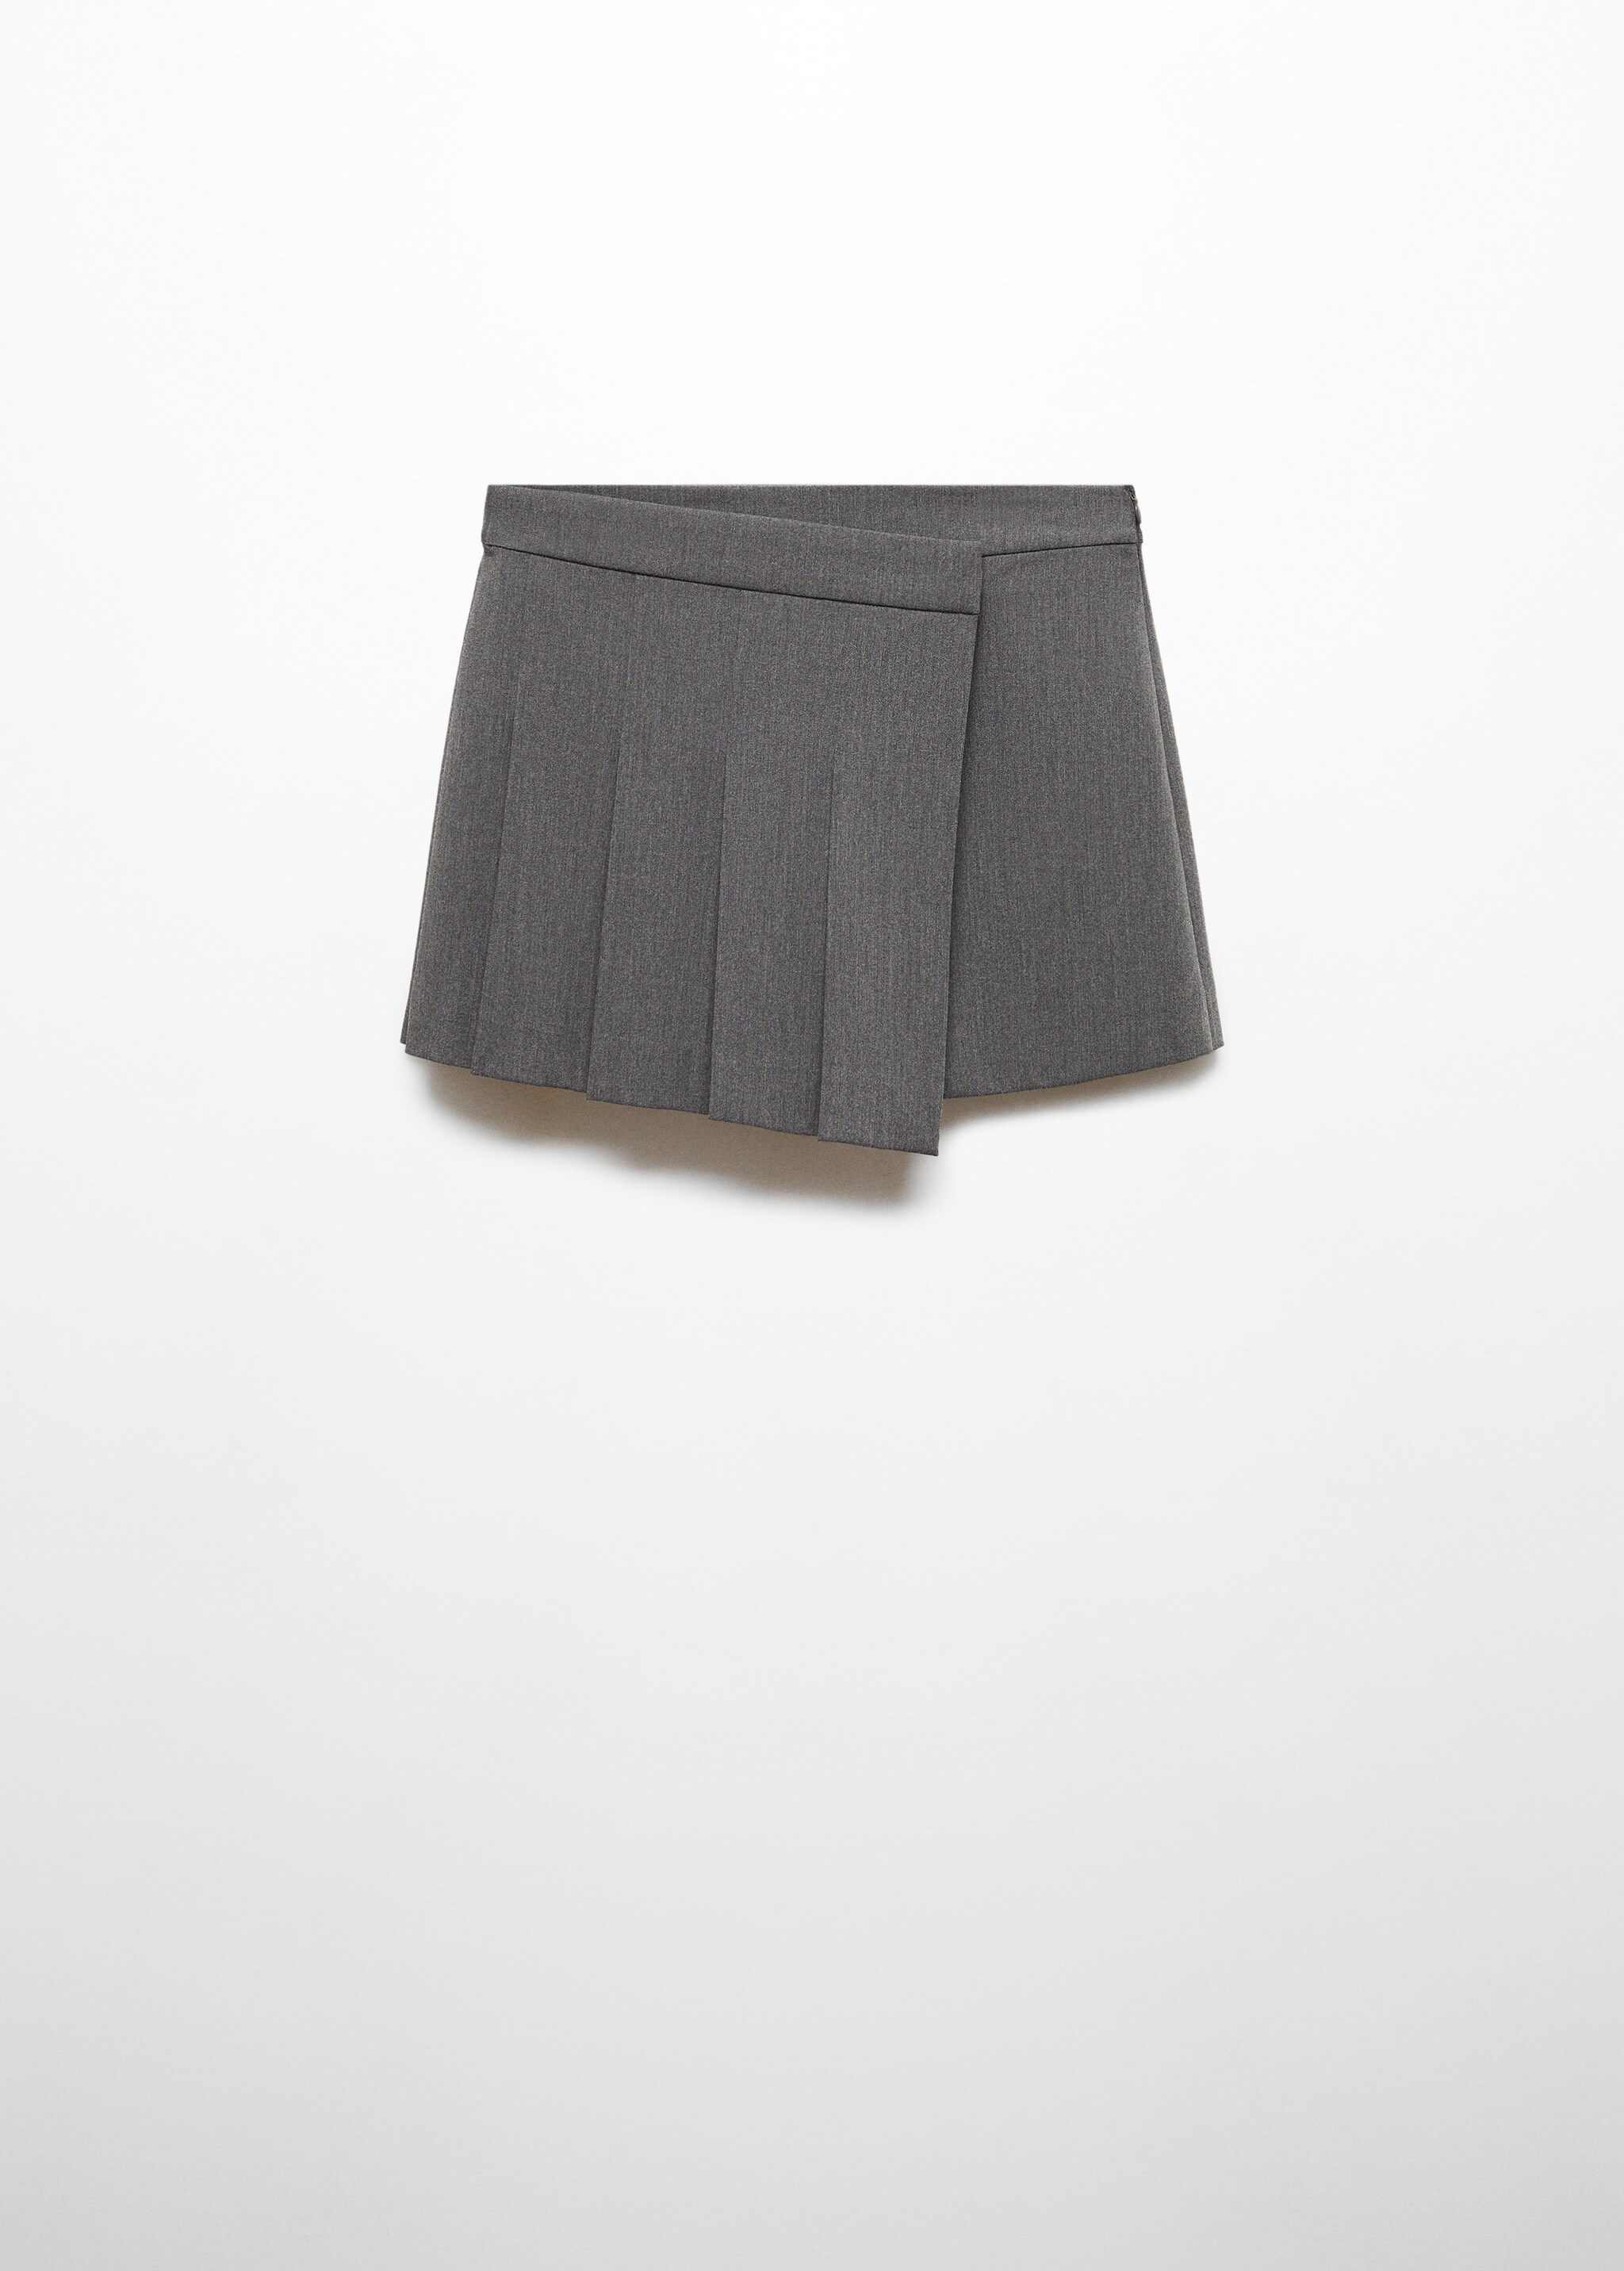 Pleated skirt pants - Article without model